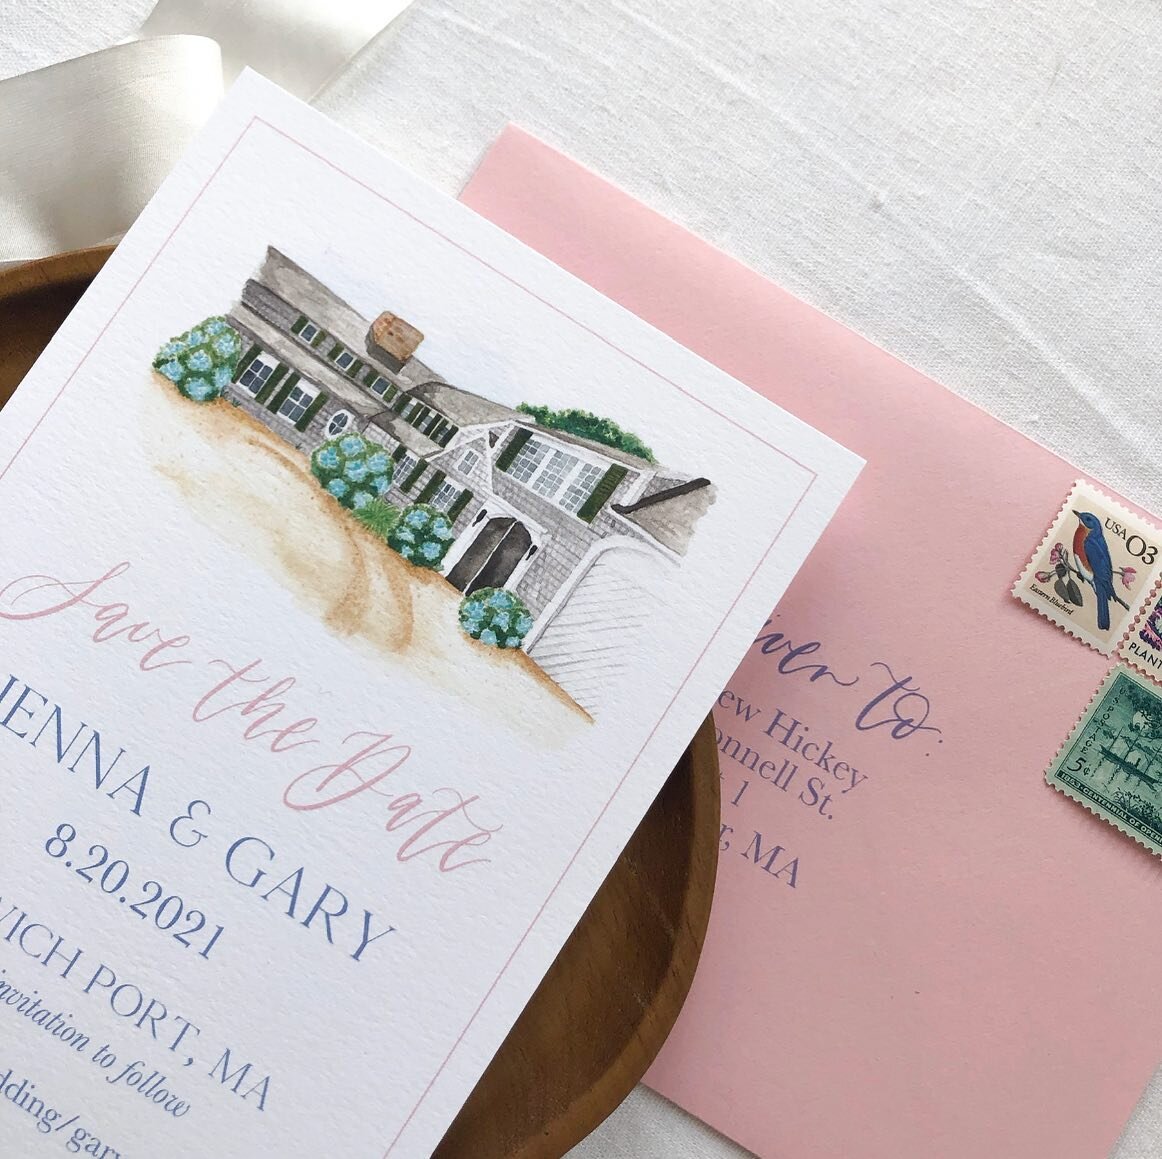 One of my favorite Save-the-Dates to date! 🥰 This reception venue is what dreams of summer weddings on The Cape are made of, and it was a delight to paint!
.
.
.
.
.
.
.
.
.
#savethedate #capecodwedding #customstationery #customwedding #customweddin